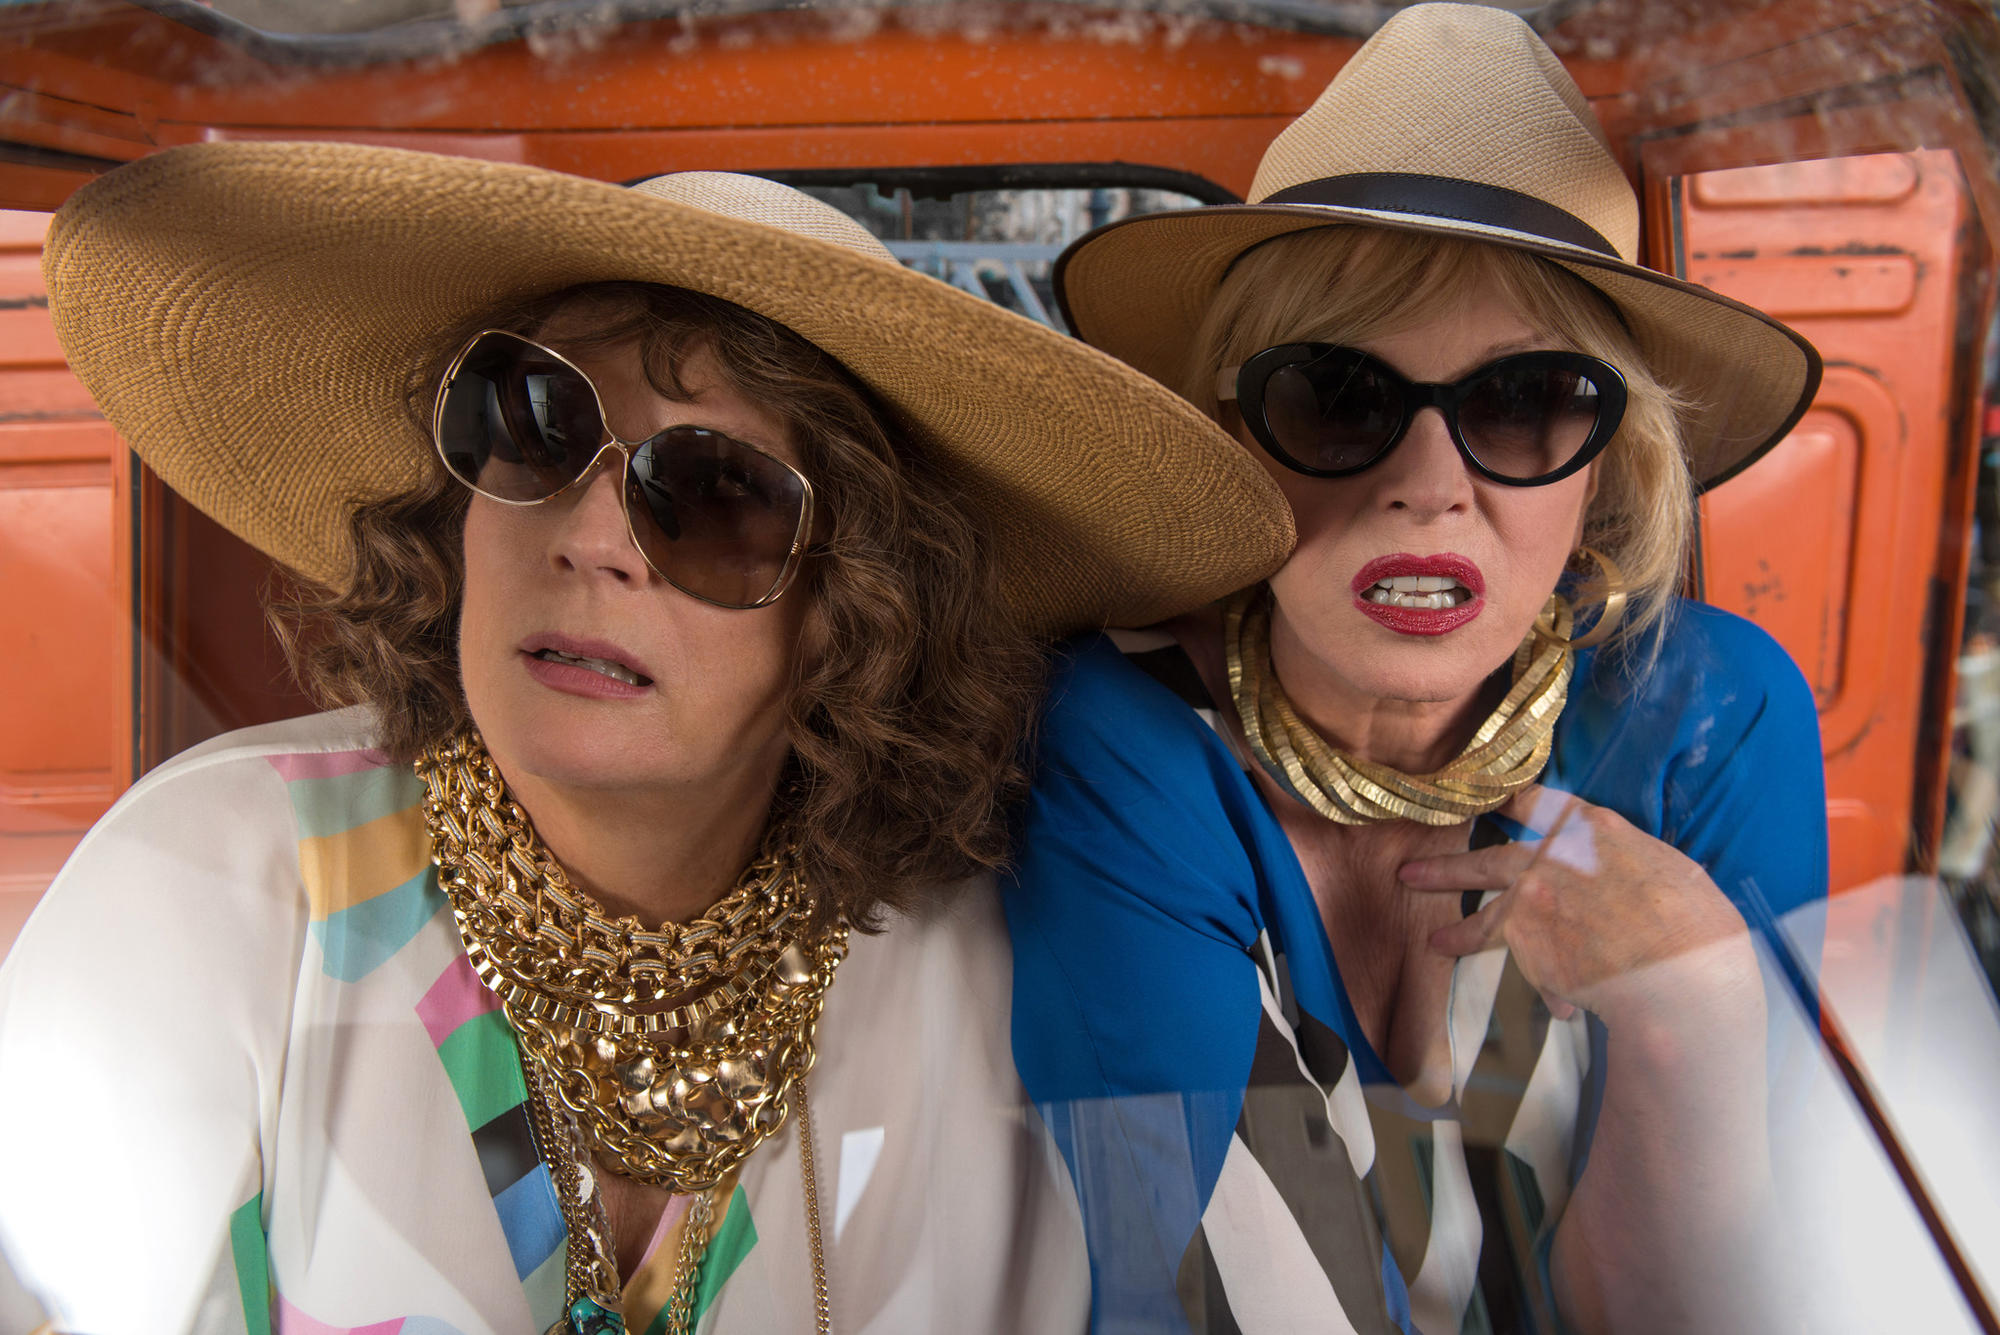 Joanna Lumley, left, as Patsy and Jennifer Saunders as Edina in 'Absolutely Fabulous.'